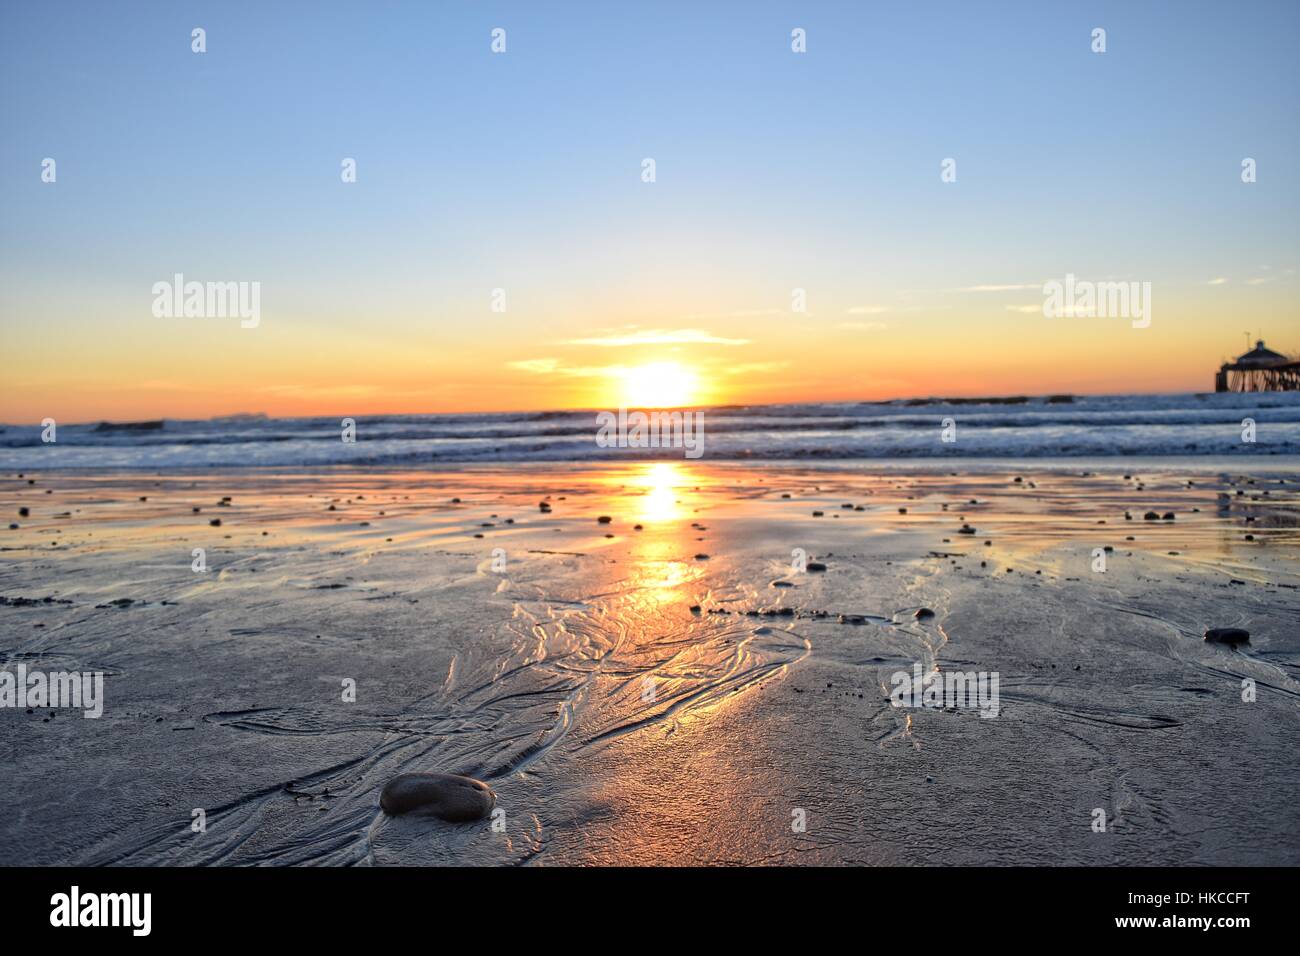 Sun set at Imperial Beach, San Diego, California. Low angle shot on sand. Stock Photo